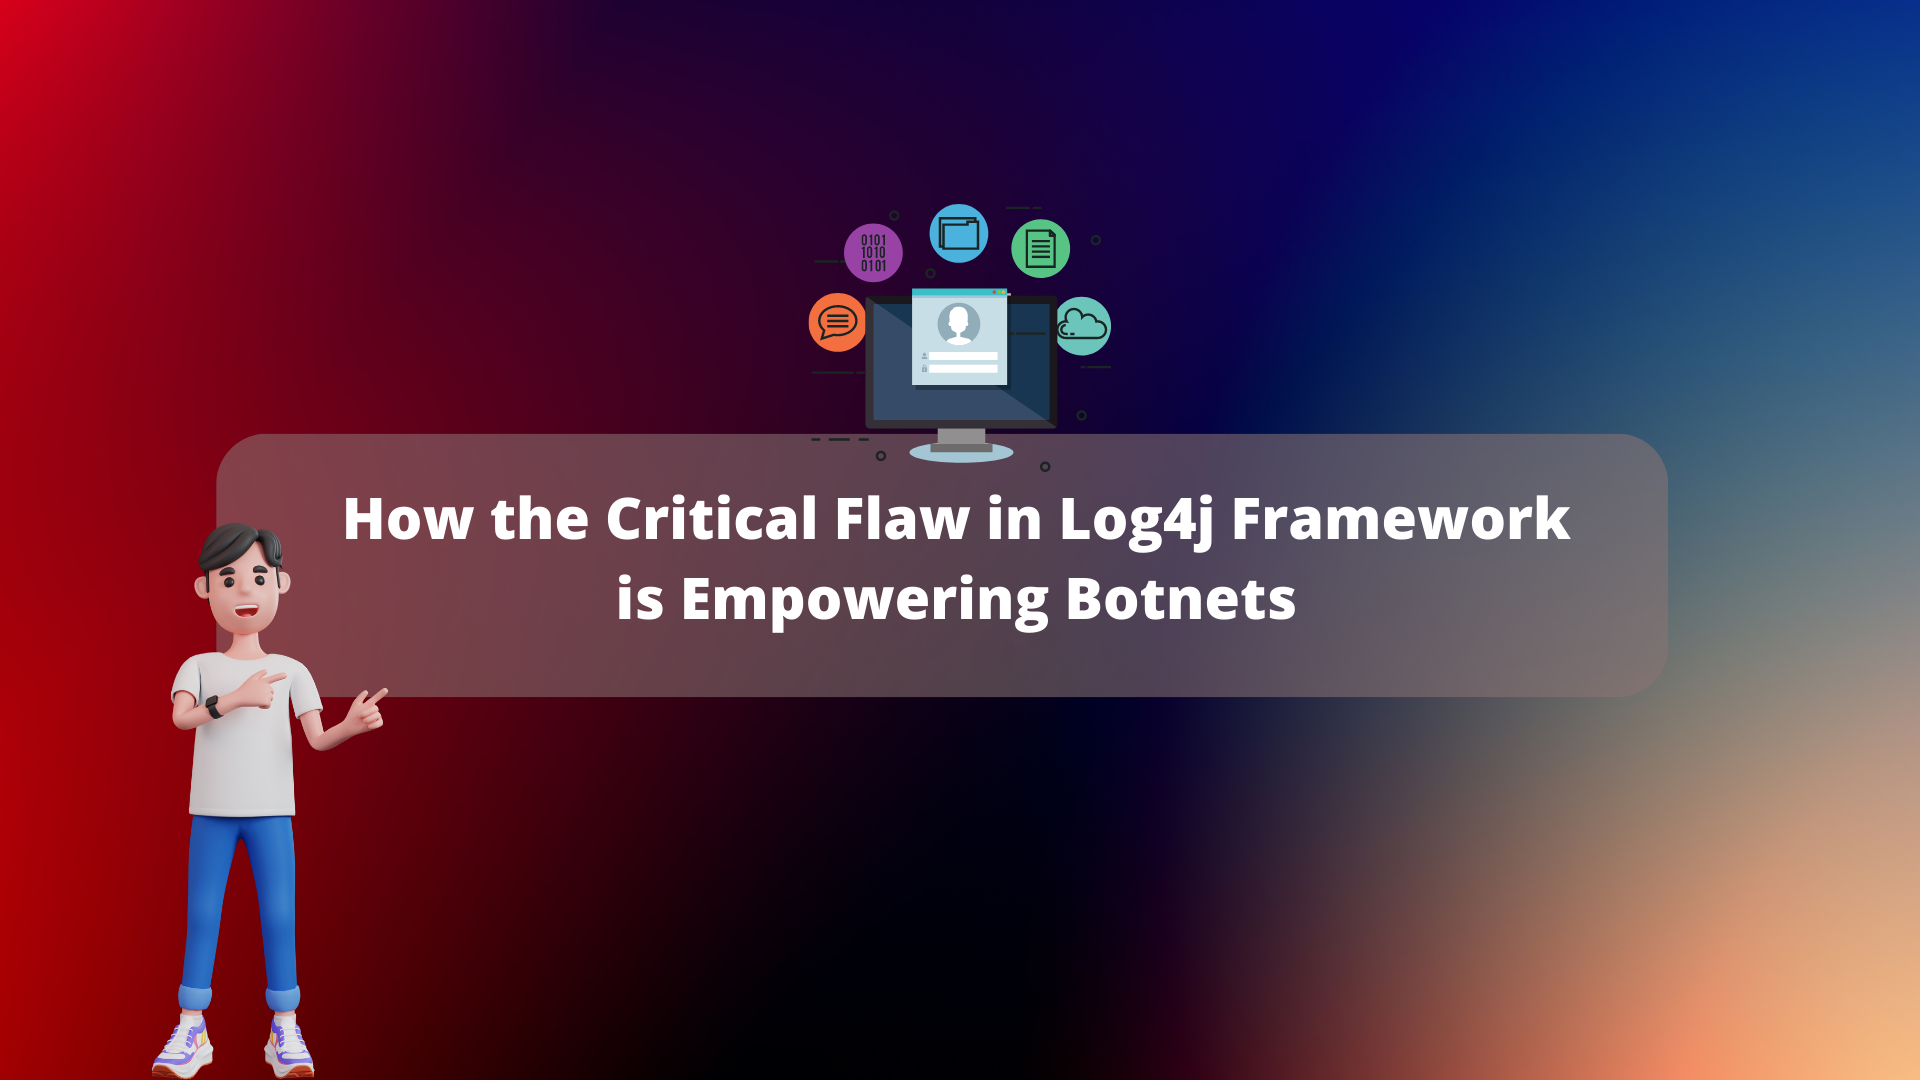 How the Critical Flaw in Log4j Framework is Empowering Botnets